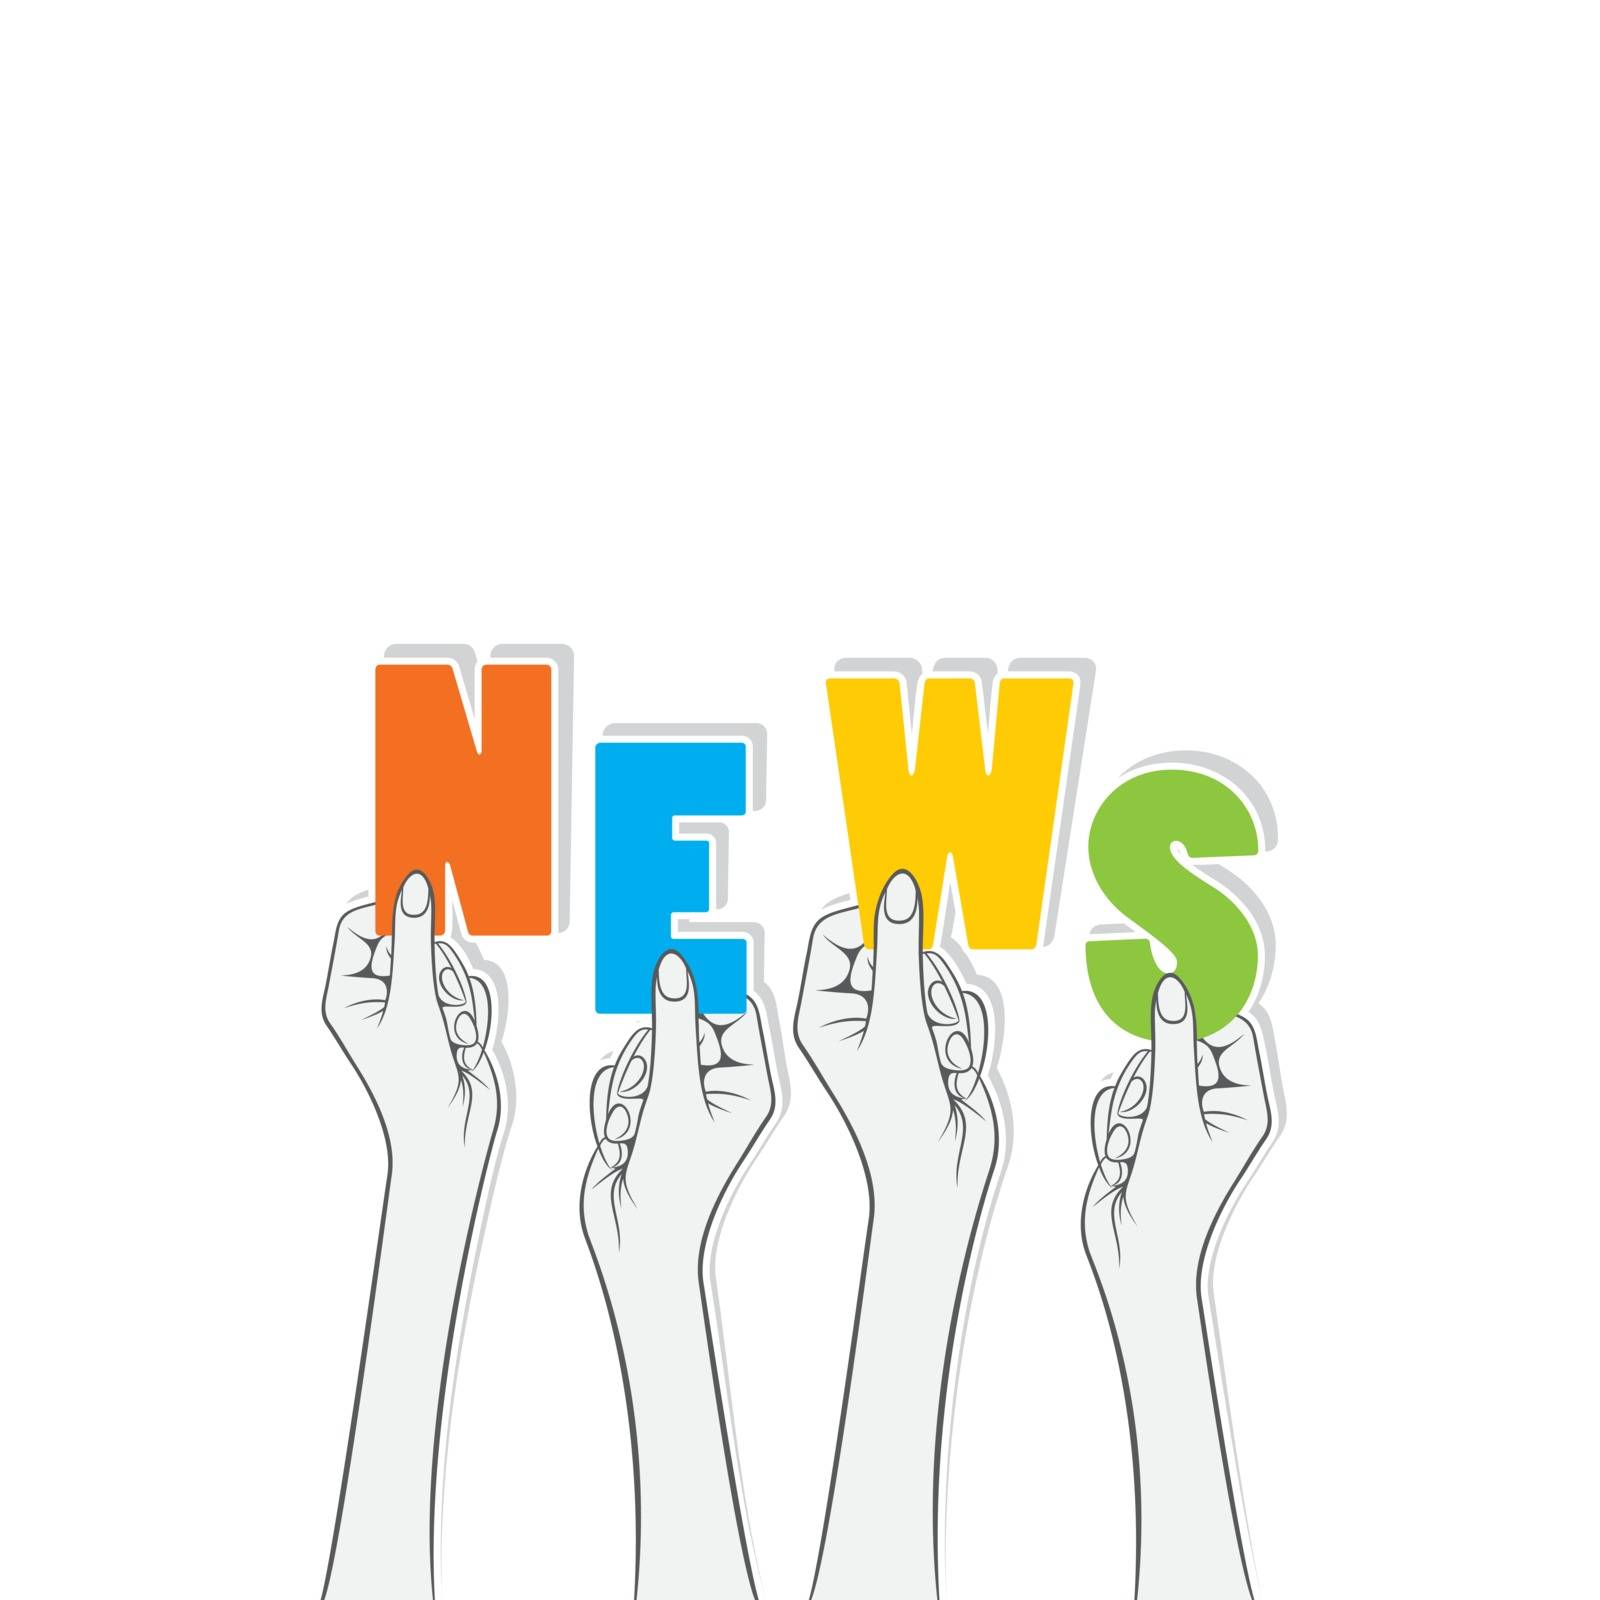 news text hold in hand design by vectoraart